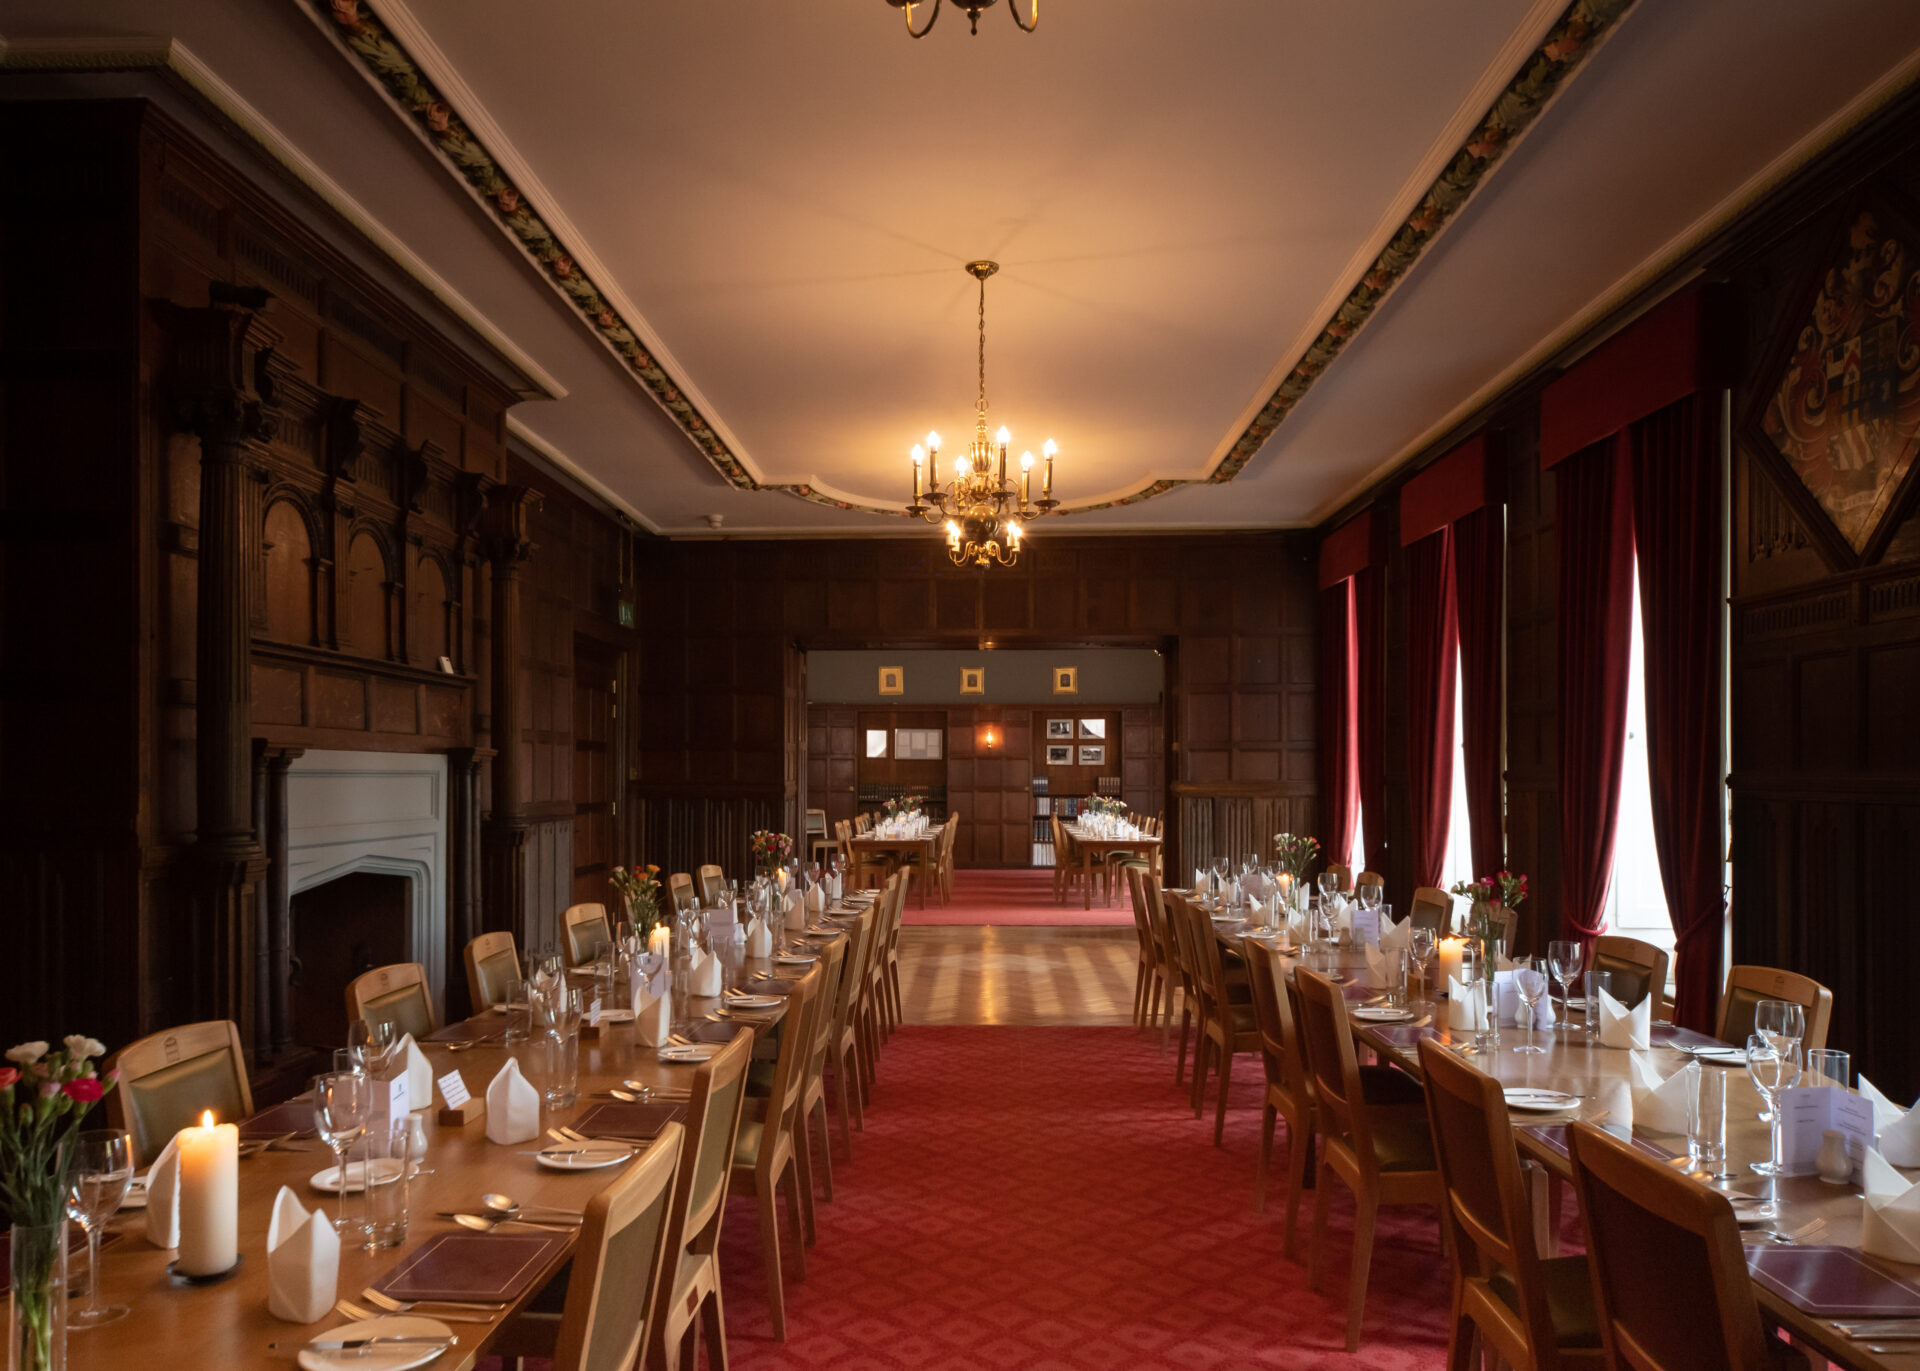 The Cumberland and Prince Christian  Dining Rooms combined, and laid for dinner.